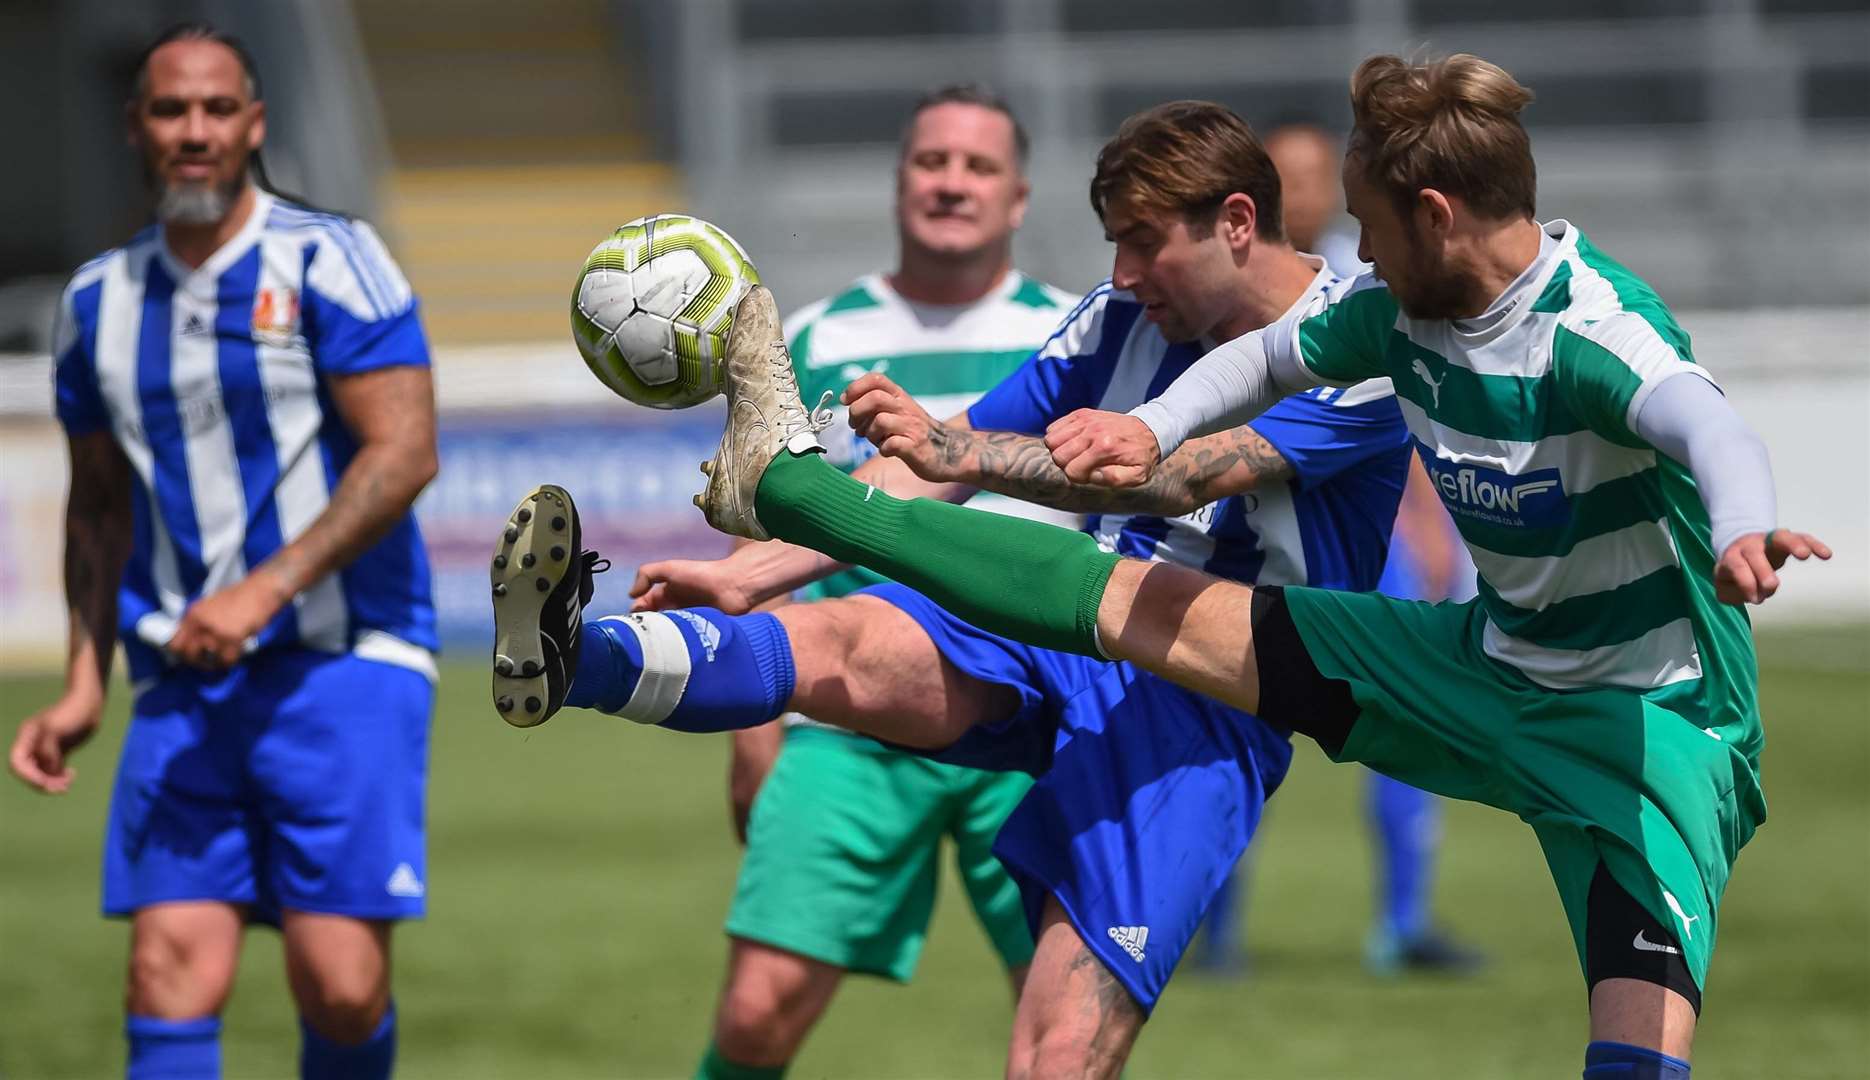 Metrogas Vets (blue) compete for possession against New Ash Green Vets. Picture: PSP Images